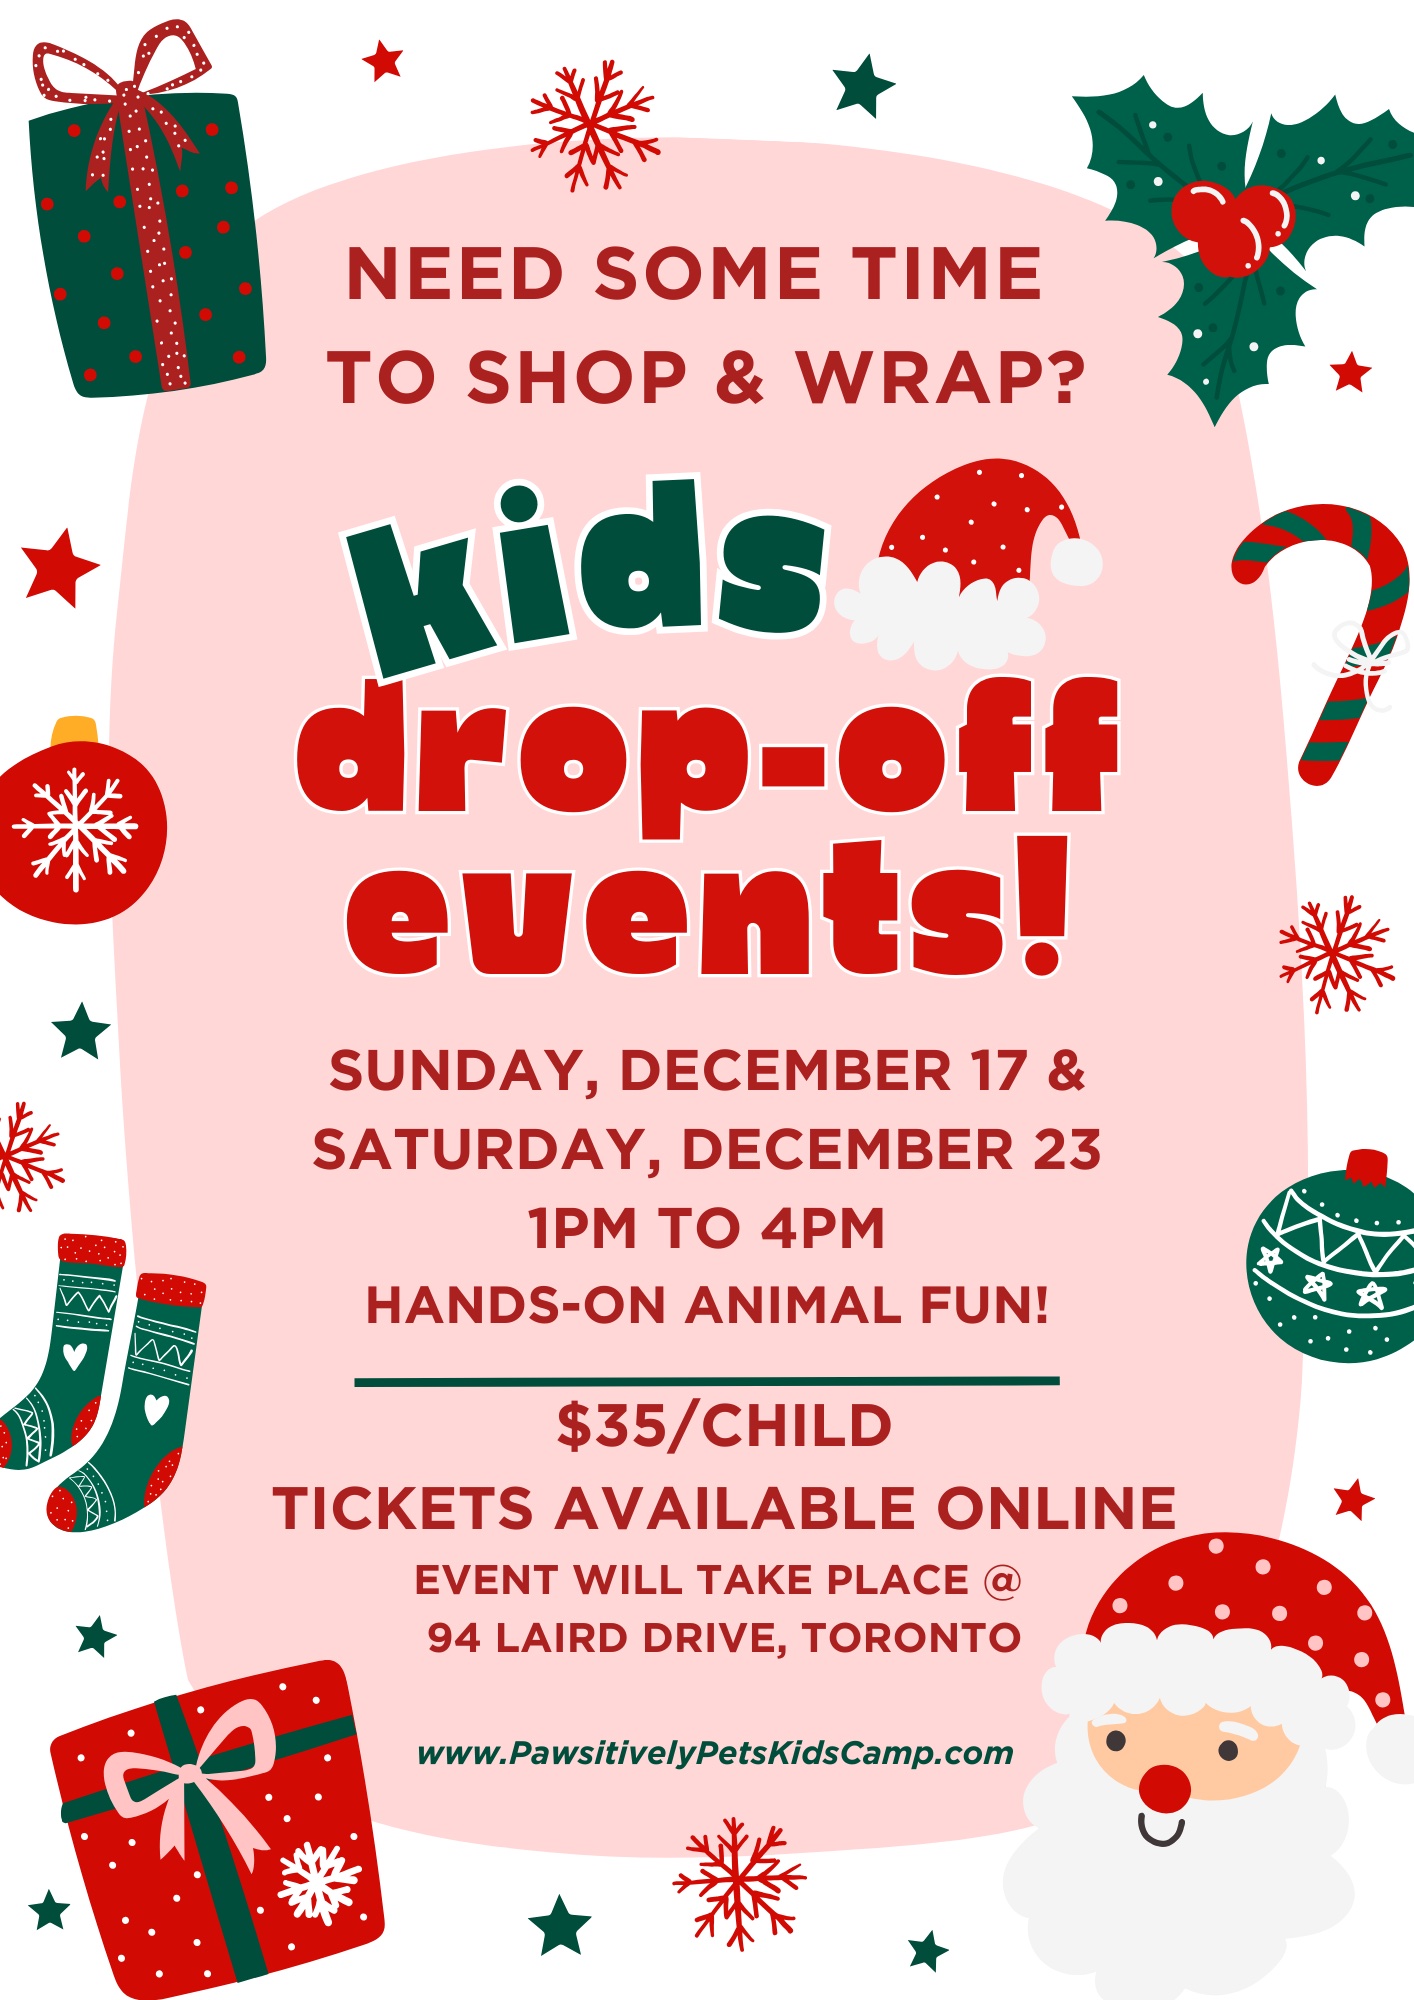 Need some time to shop & wrap? Kids Drop-Off events! Sunday, December 17 & Saturday, December 23 1PM to 4PM $35/child